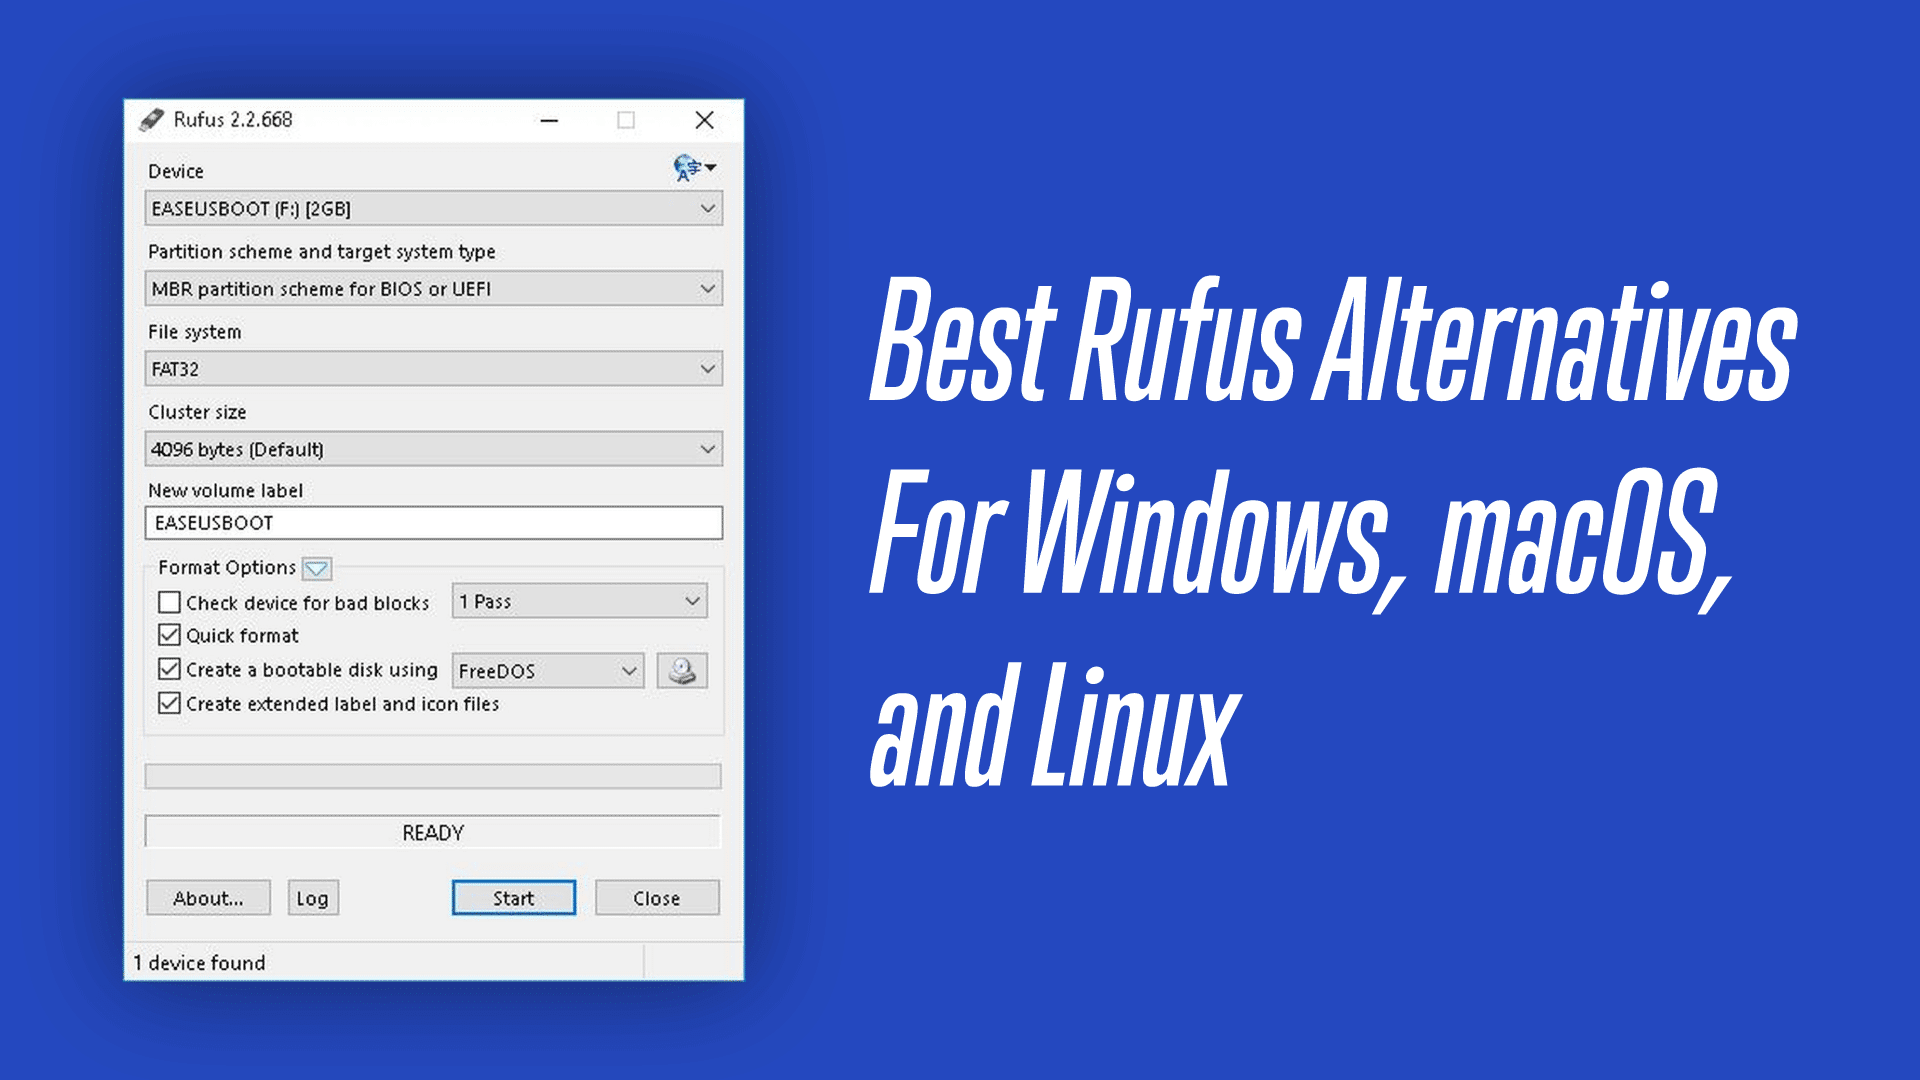 Best Rufus Alternatives for Windows, macOS, and Linux